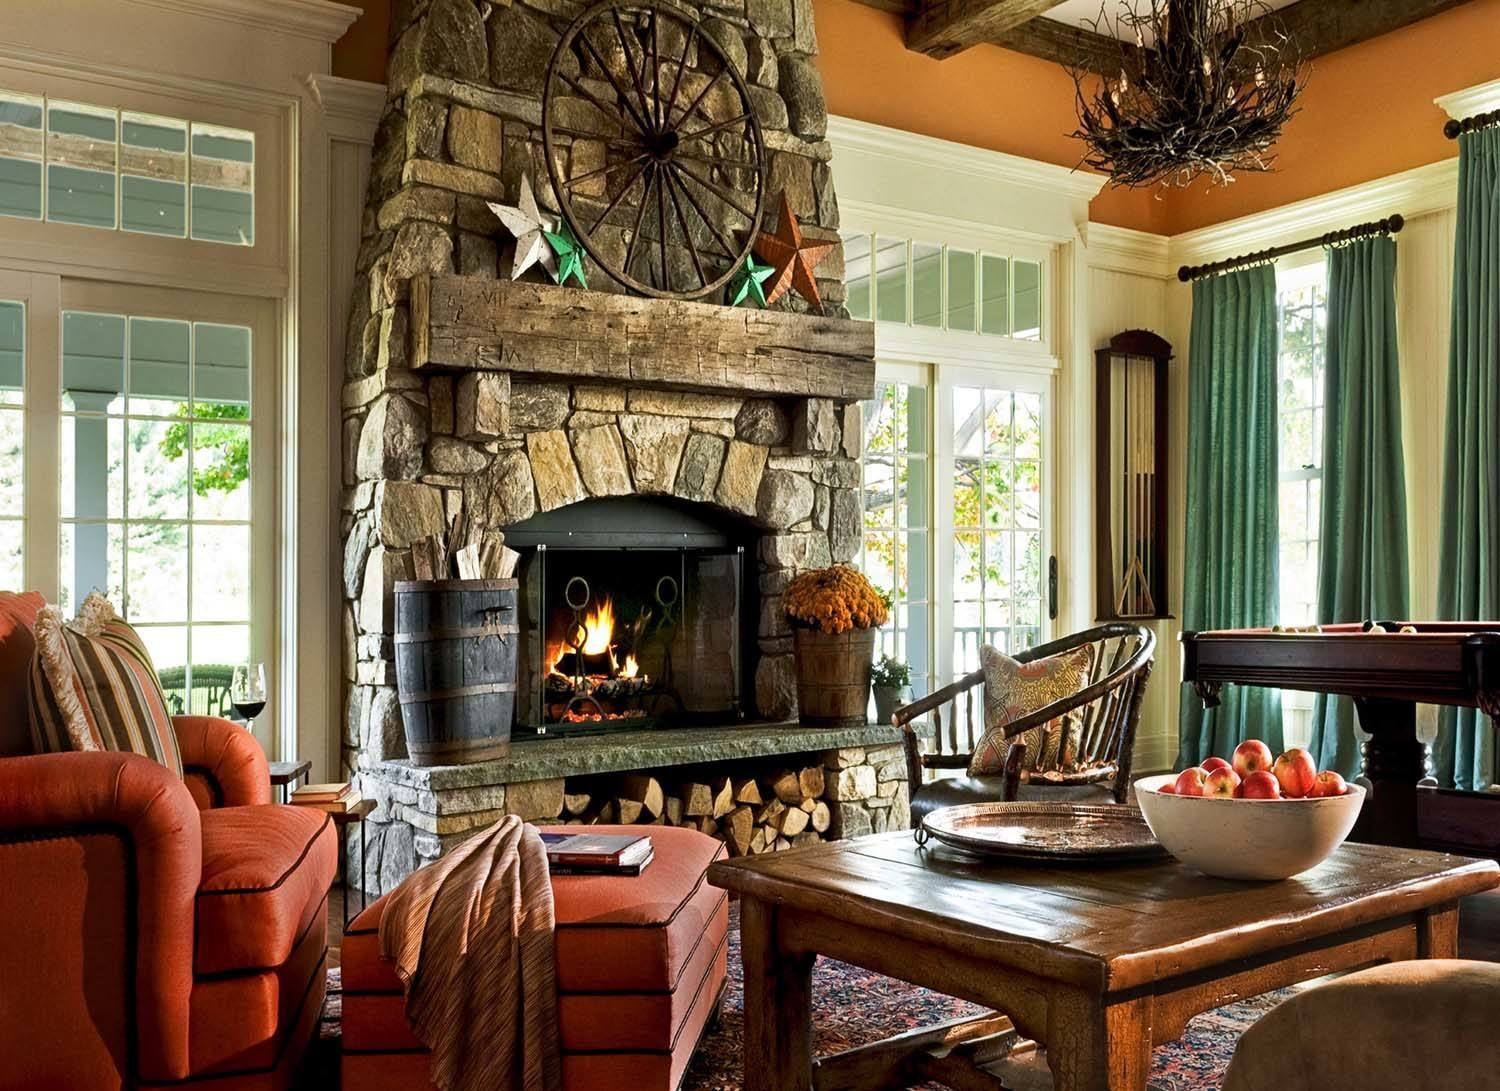 Fireplace in the country style